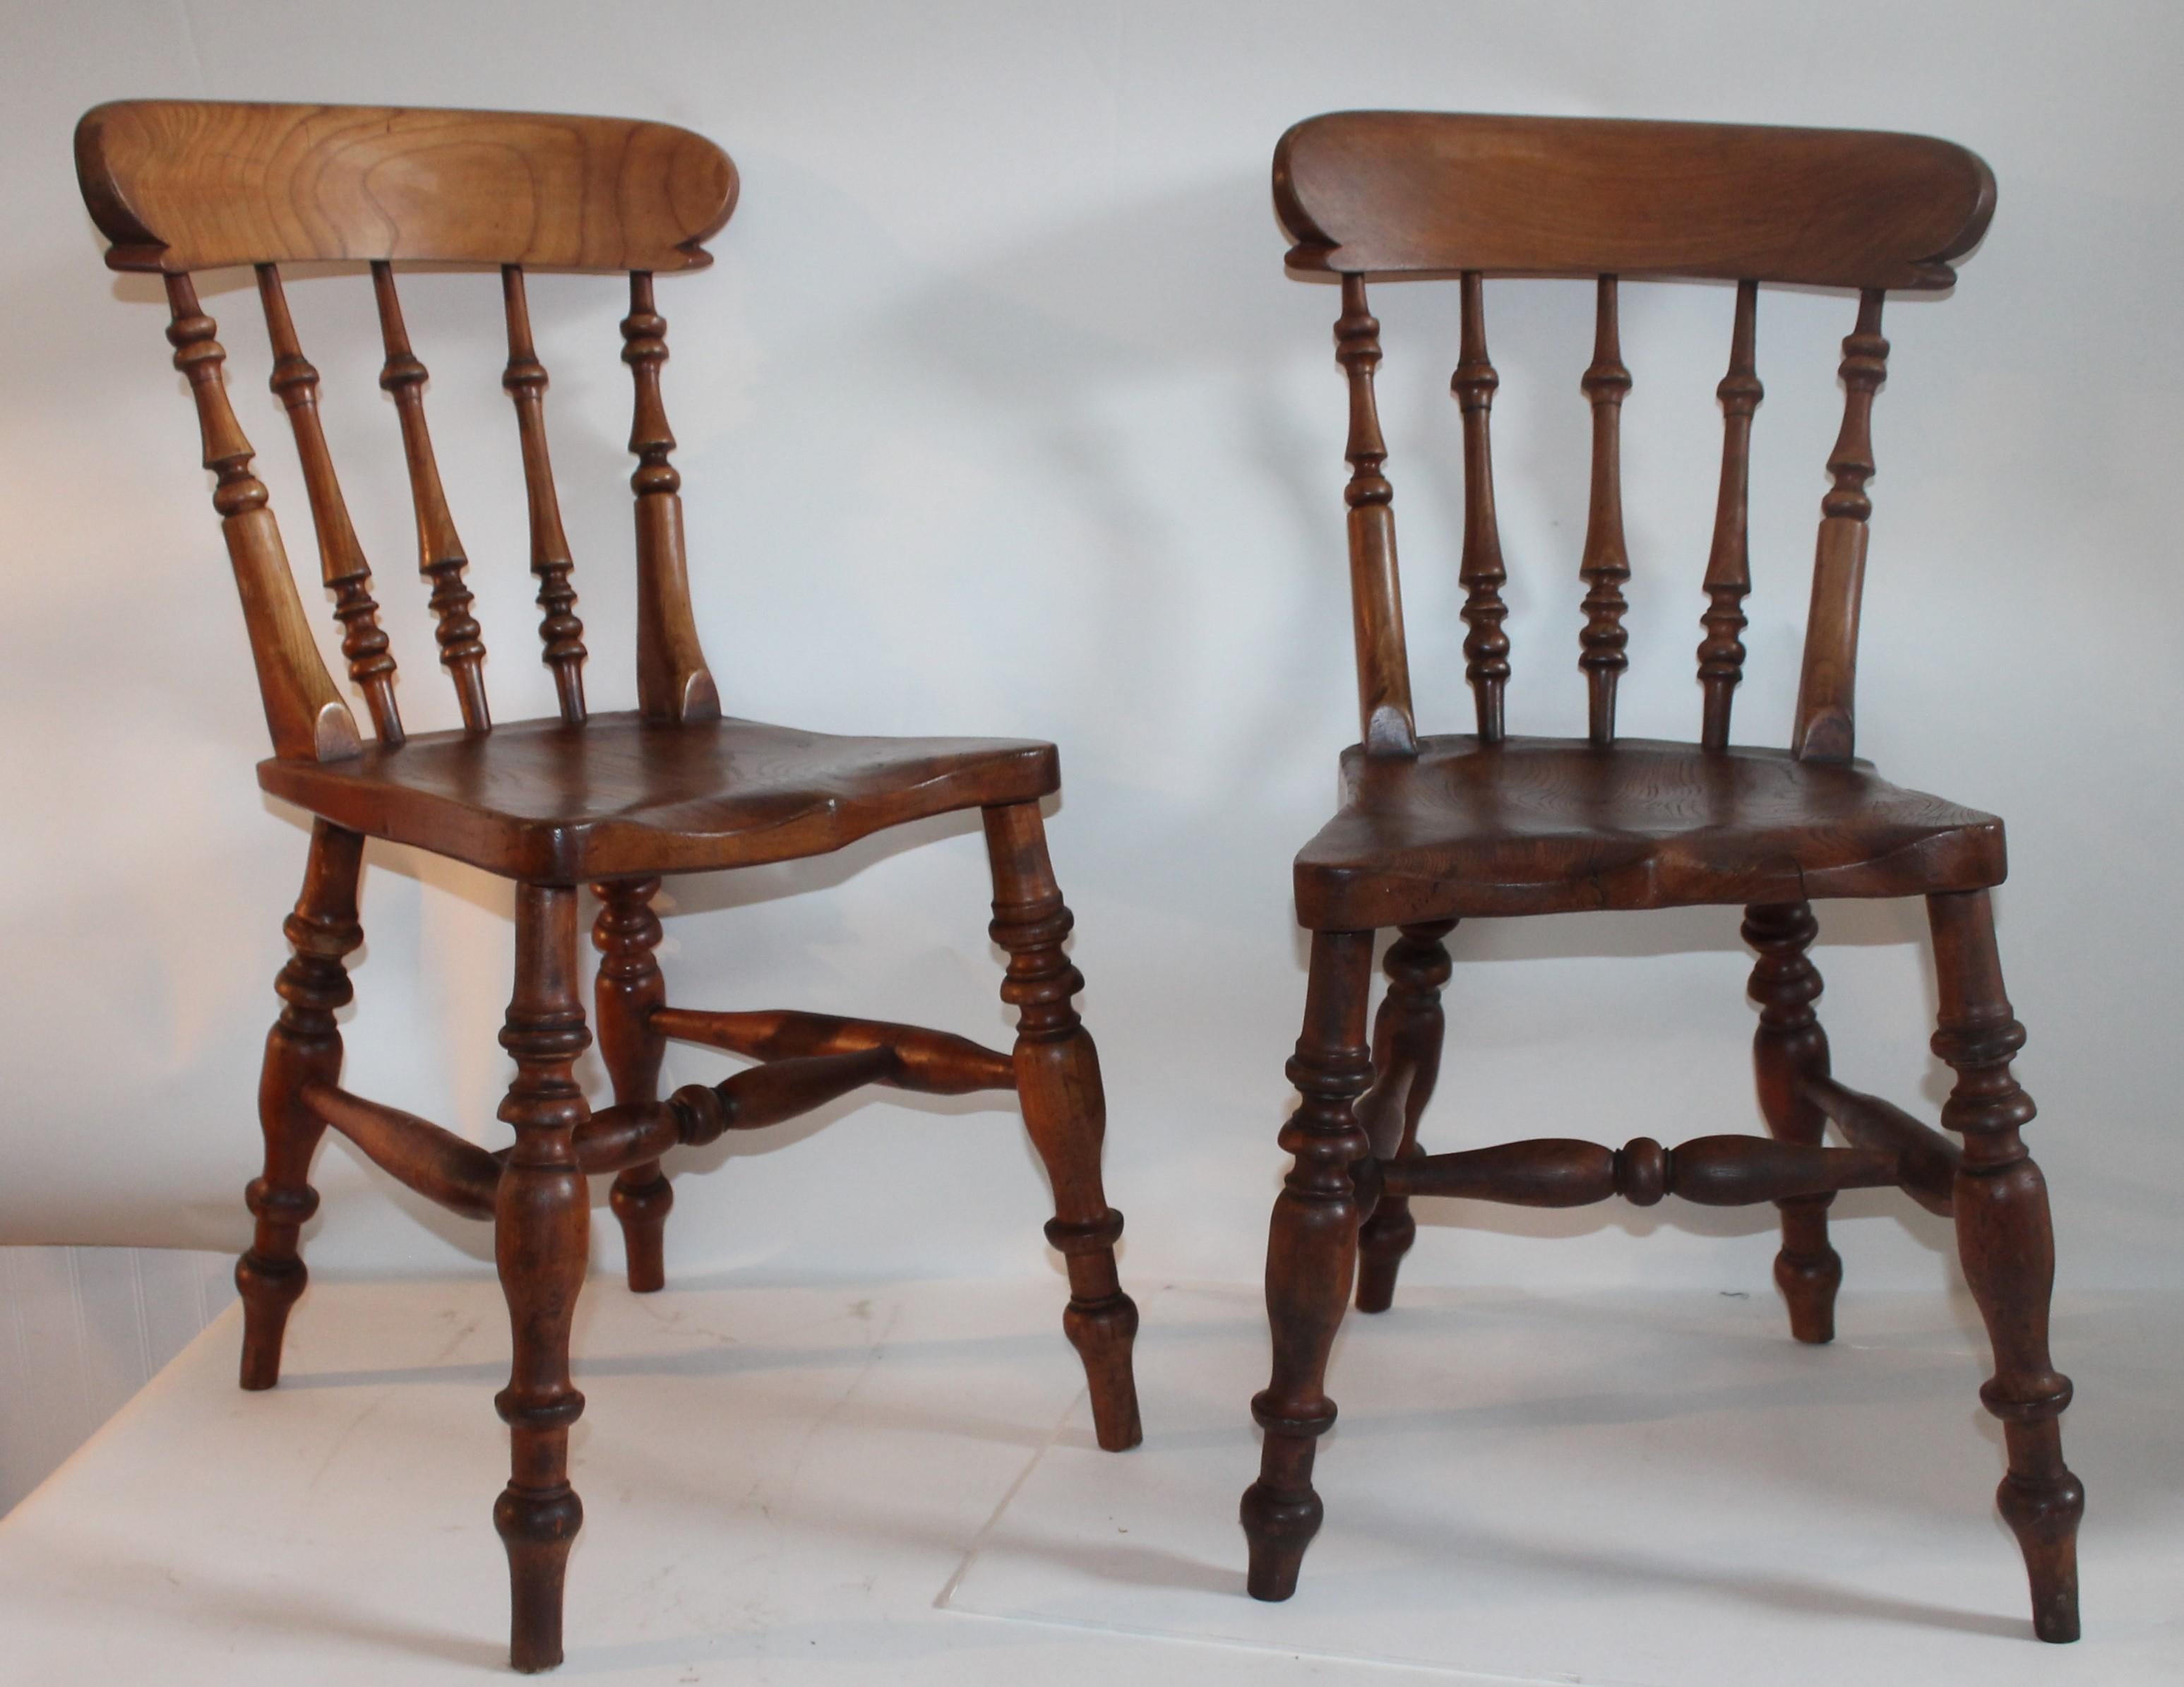 Pair of 19th century English pub side chairs. These chairs are super comfortable and sturdy.